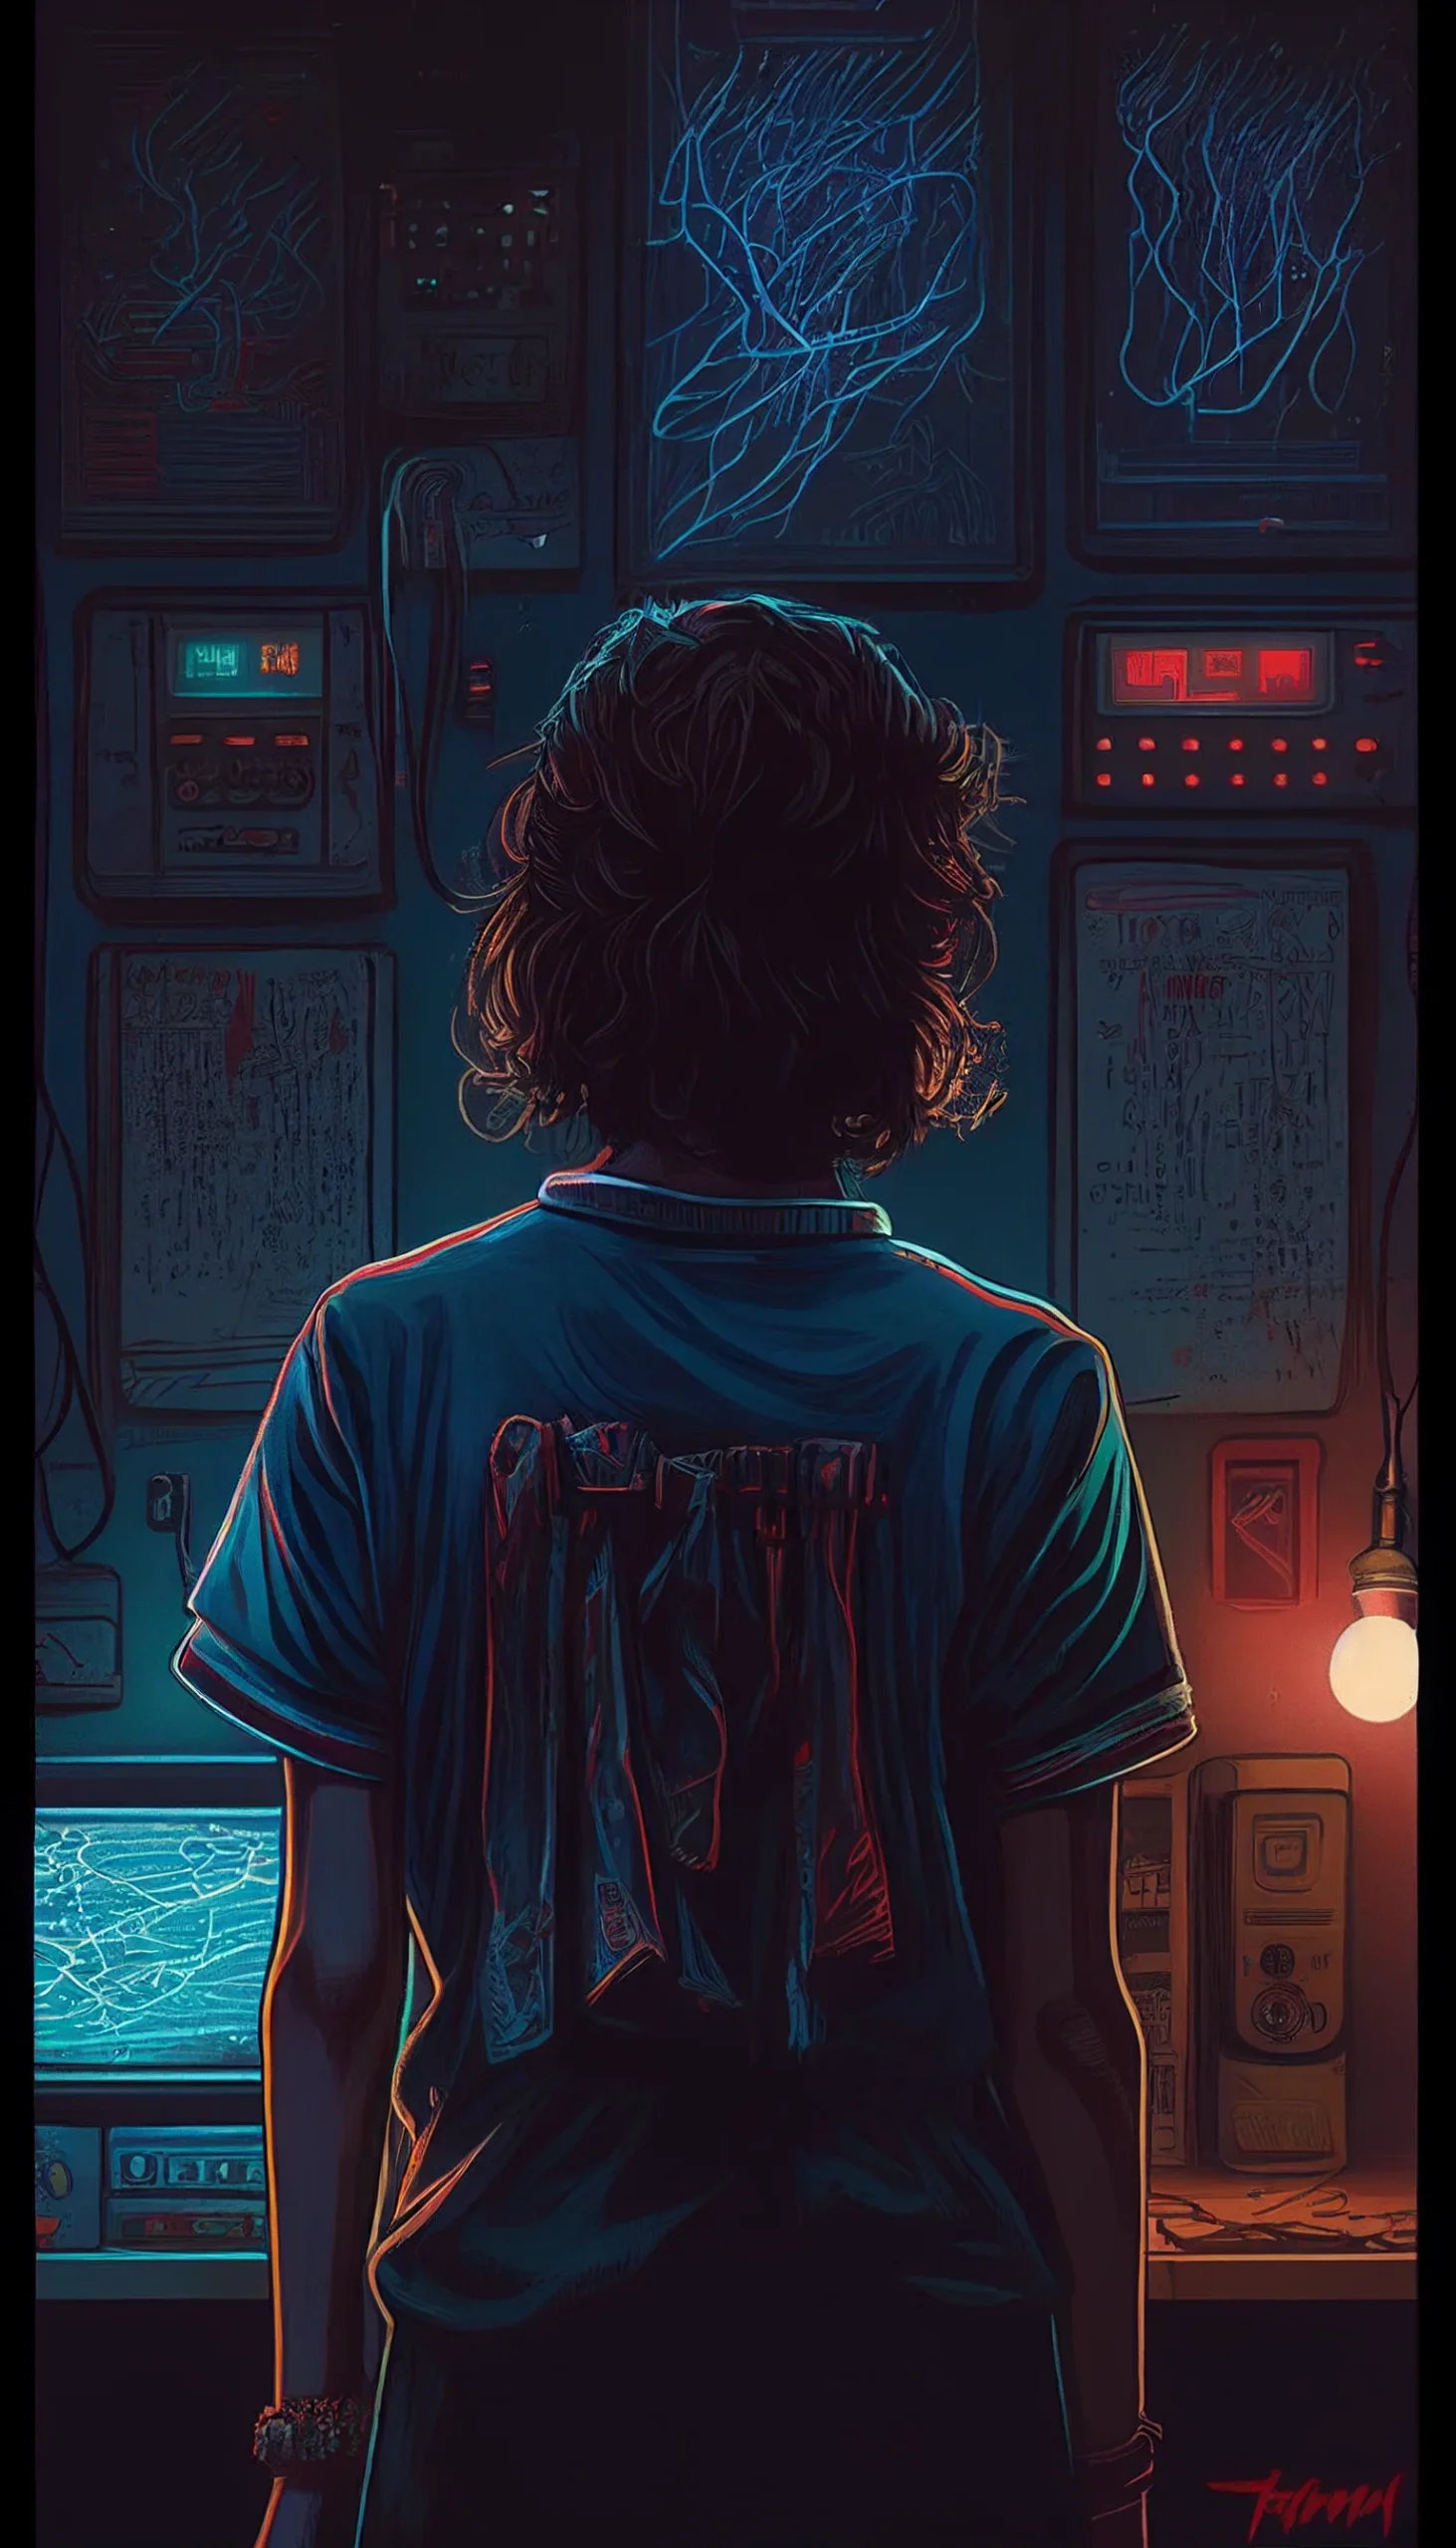 Stranger Things wallpaper for iPhone and Android devices. - Stranger Things